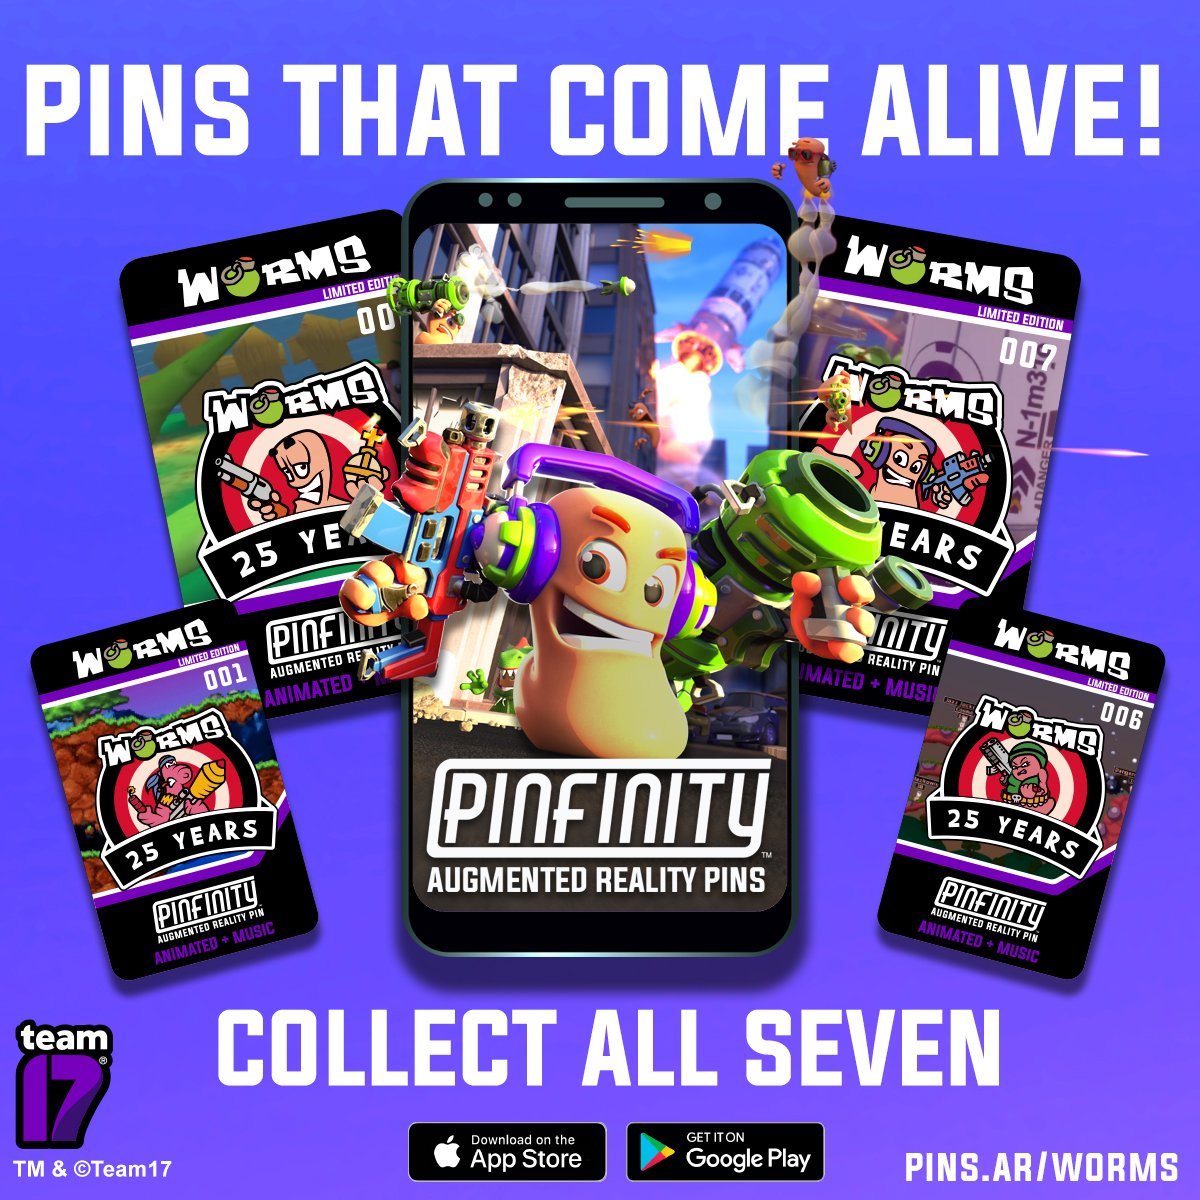 Pinfinity Celebrates 25th Anniversary of Worms with Seven-Pin Worms Collection! - Pinfinity - Augmented Reality Collectible Pins